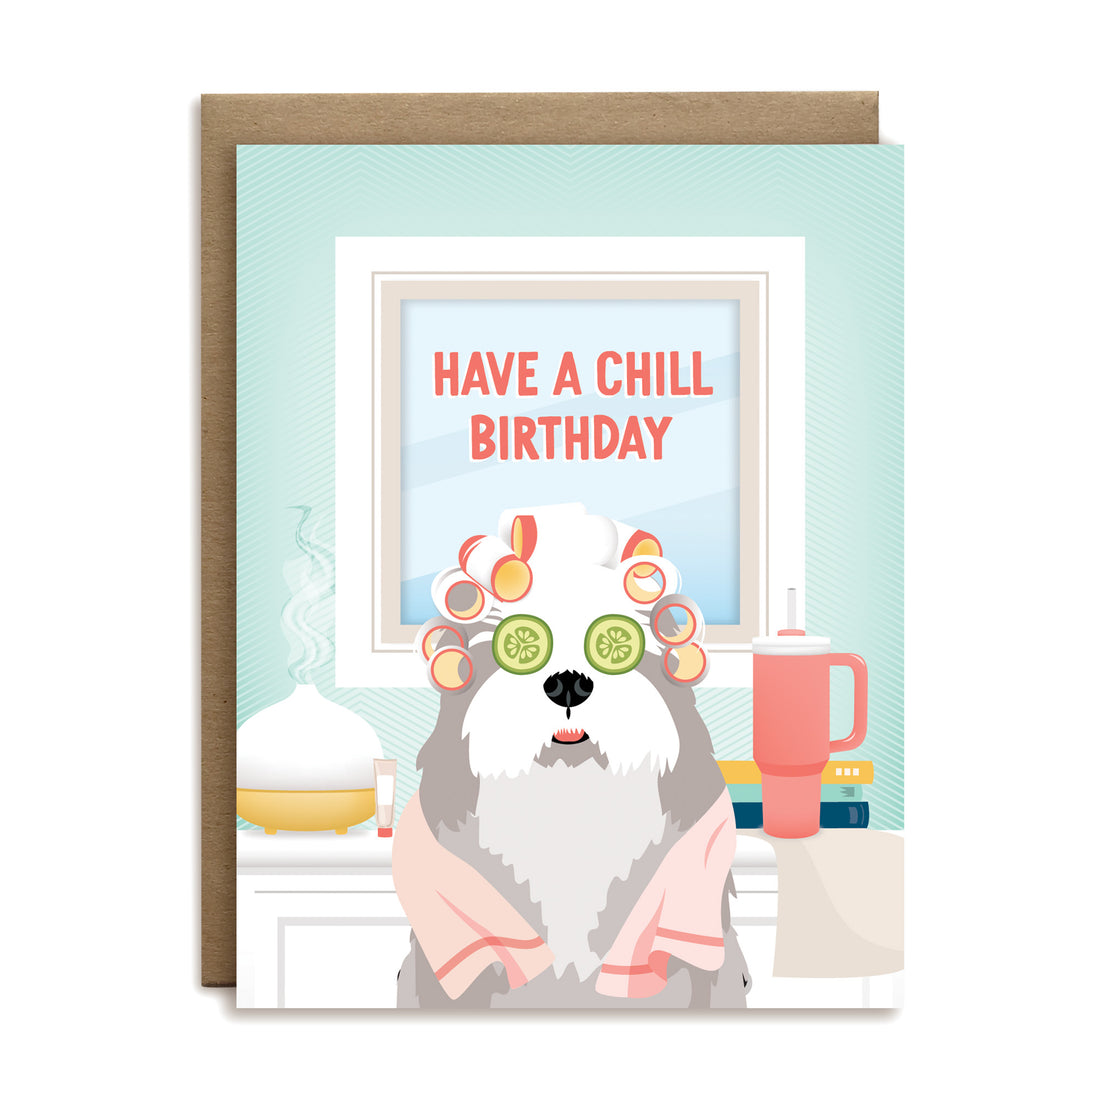 Have a chill birthday greeting card by I&